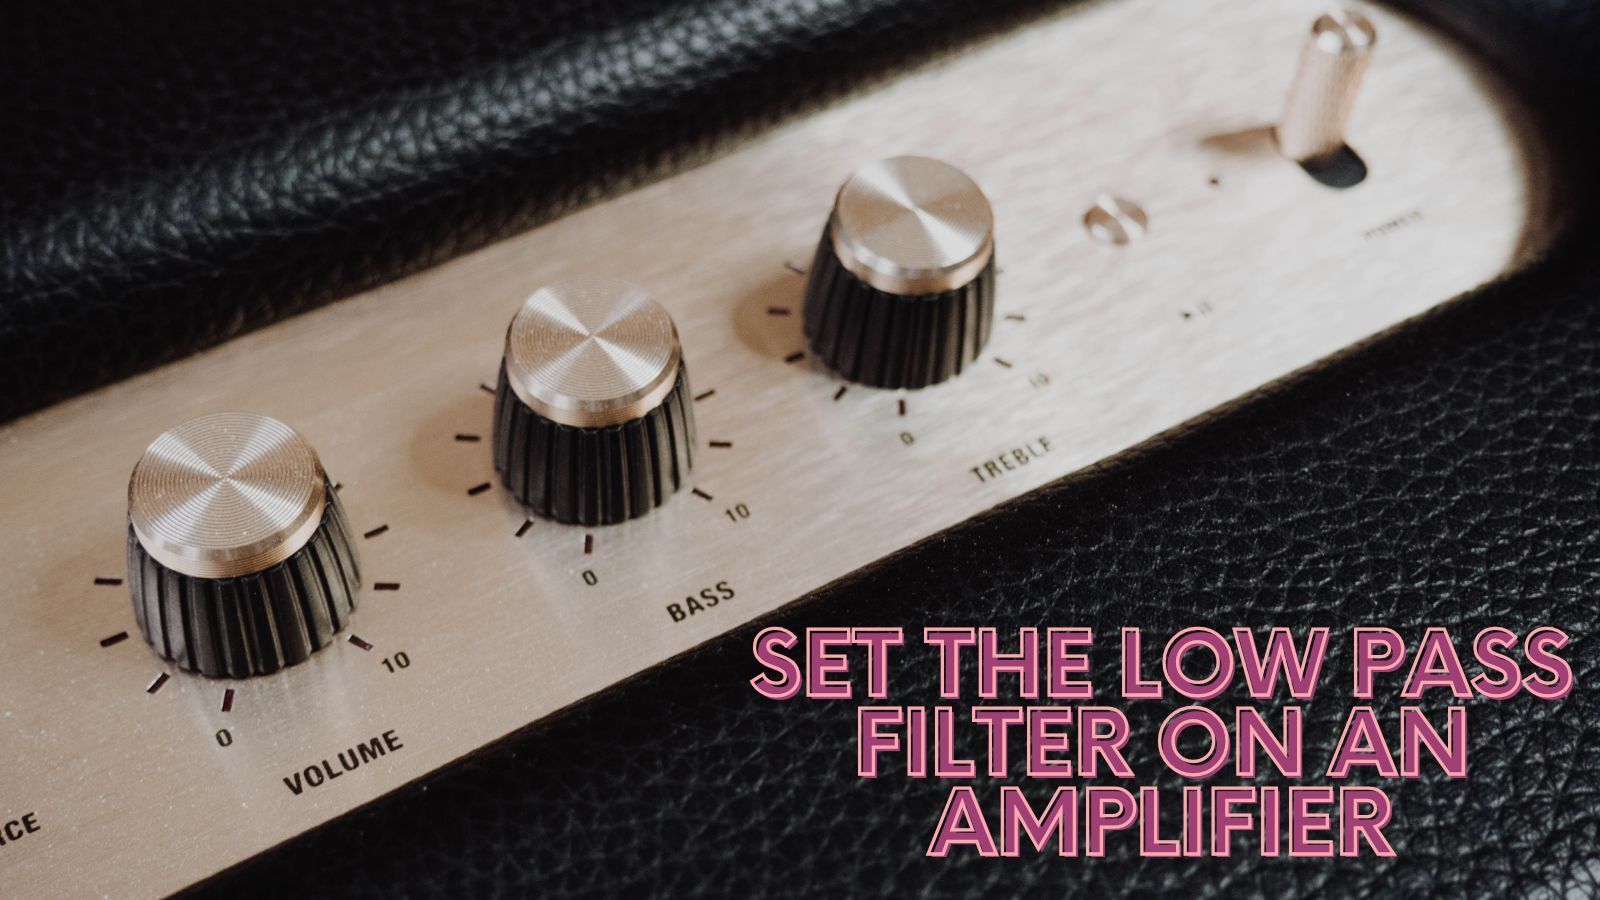 How to Set the Low Pass Filter on an Amplifier?